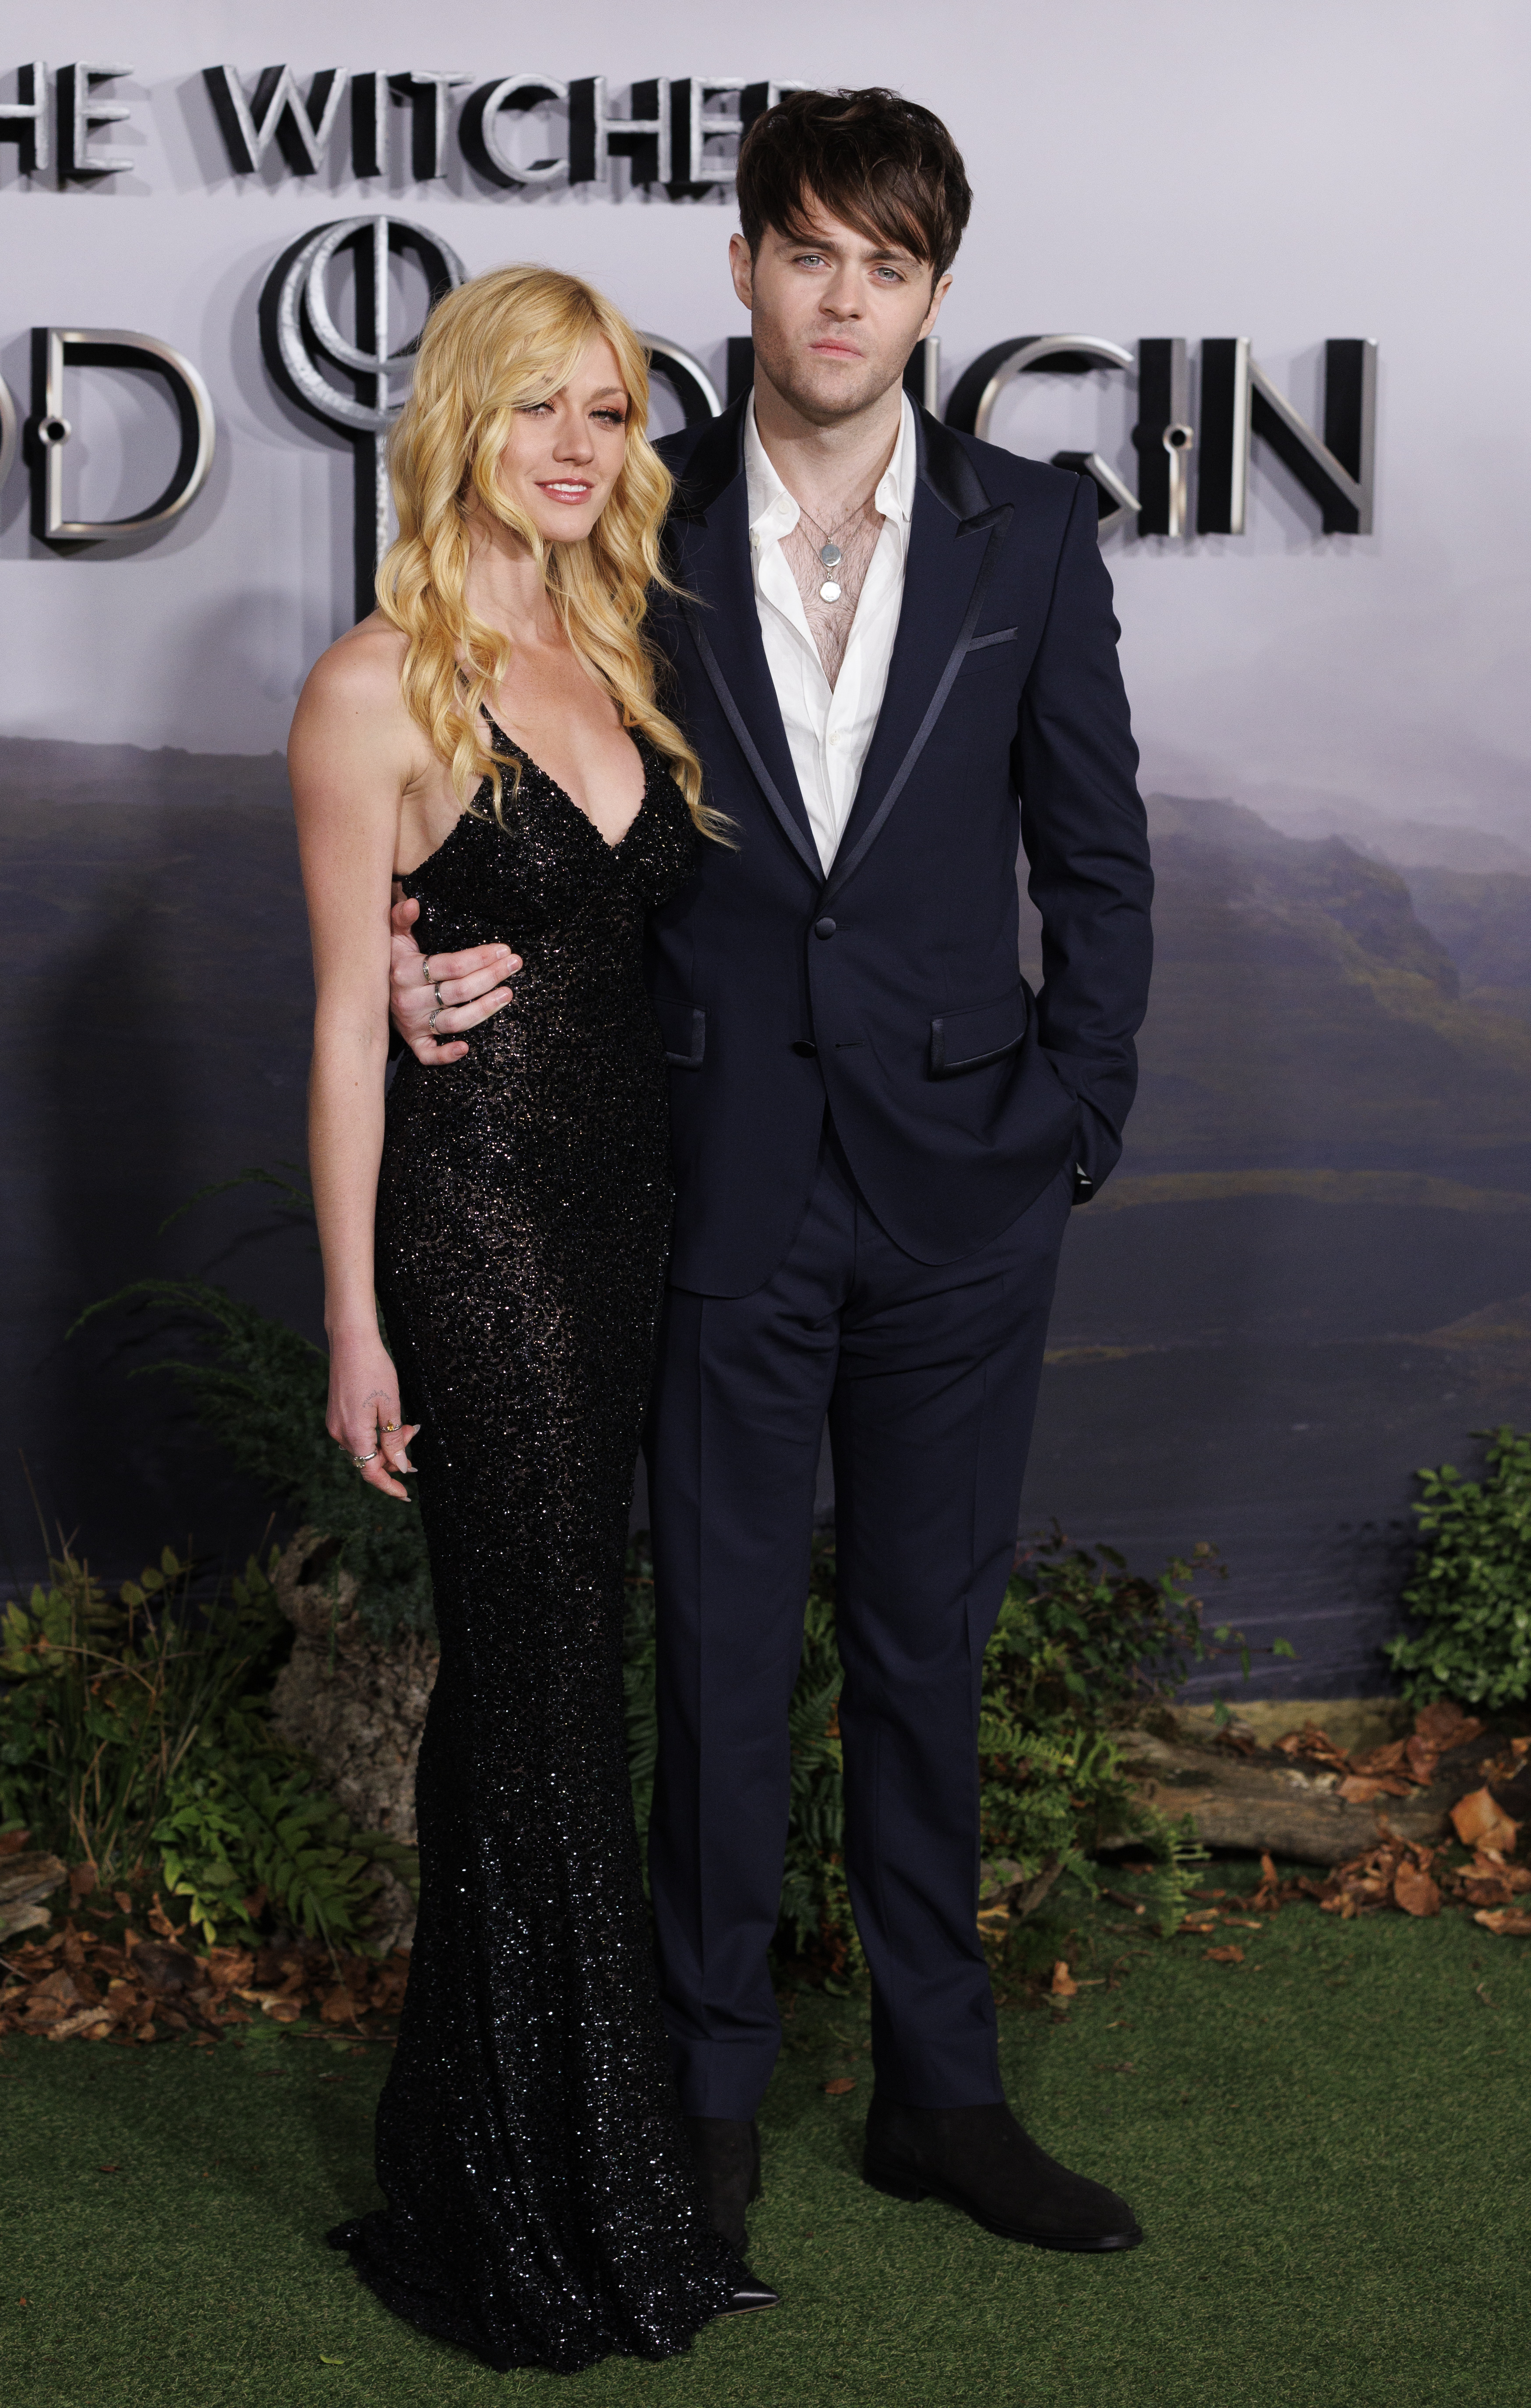 Katherine McNamara and Joey Batey attend the premiere of "The Witcher: Blood Origin" at BFI Southbank, on December 12, 2022, in London, England. | Source: Getty Images